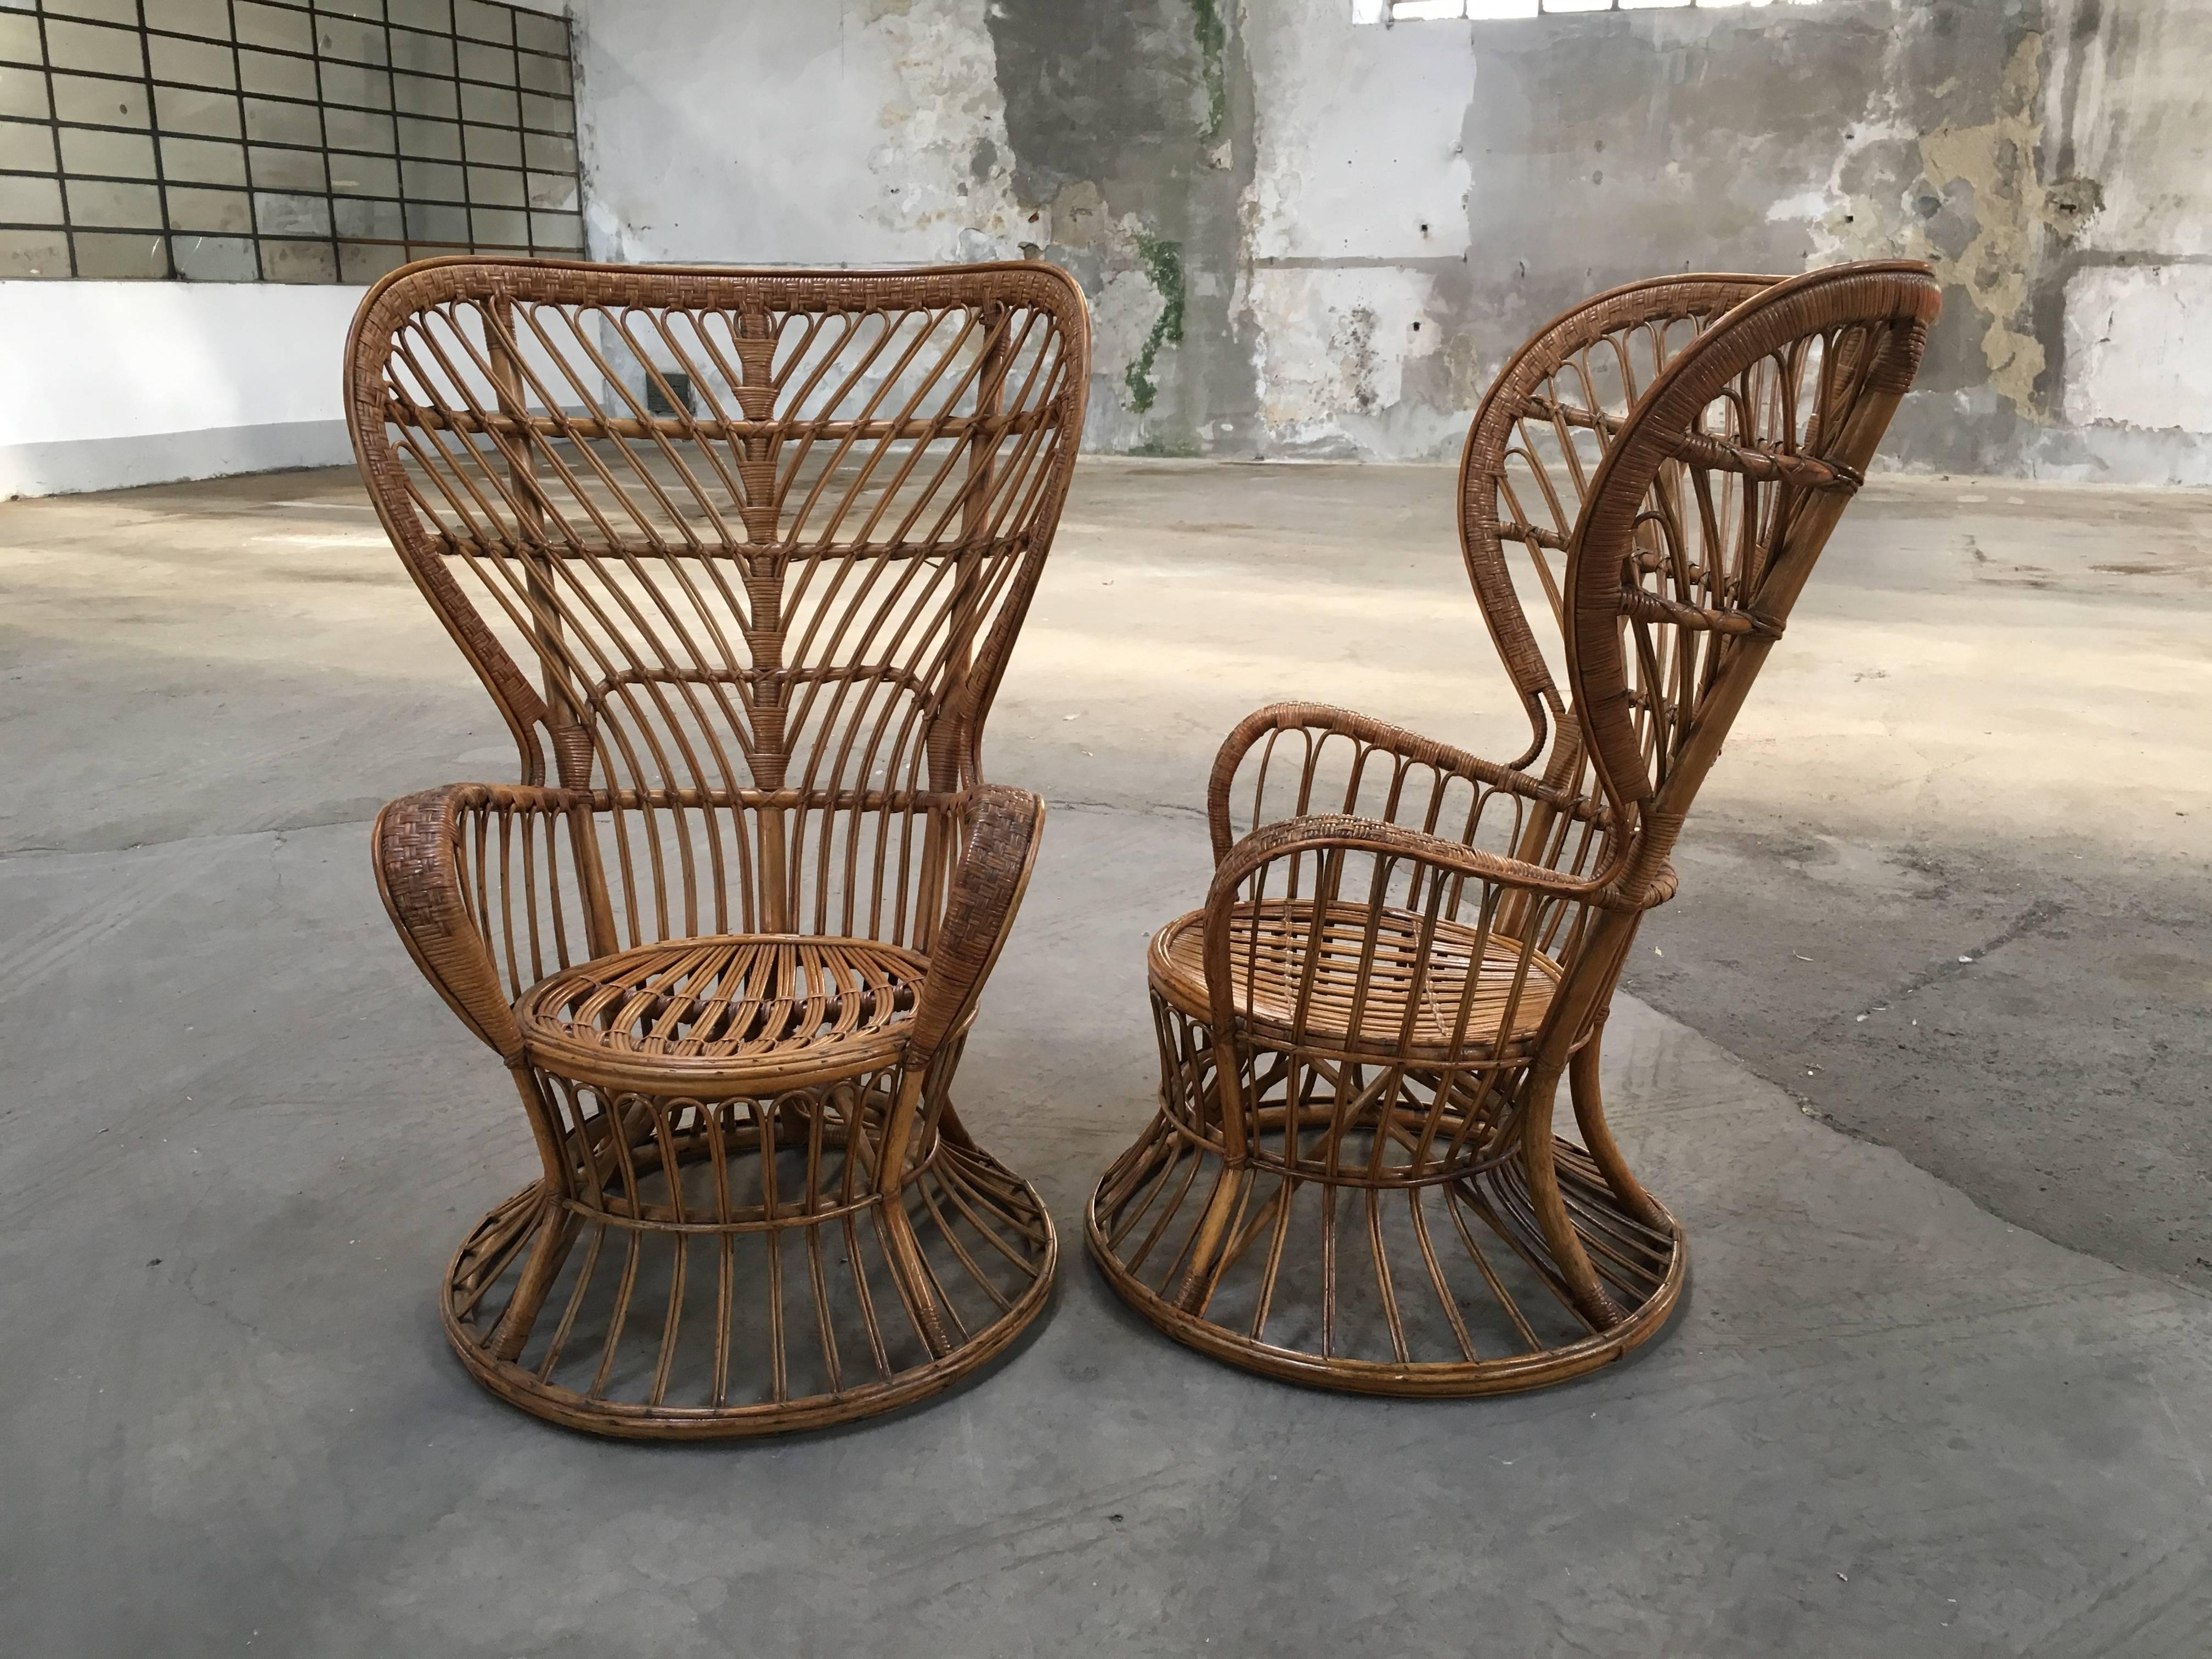 Pair of Italian rattan chairs from 1940s designed by Lio Carminati, edited by Bonacina.
Saleable separately, on demand.